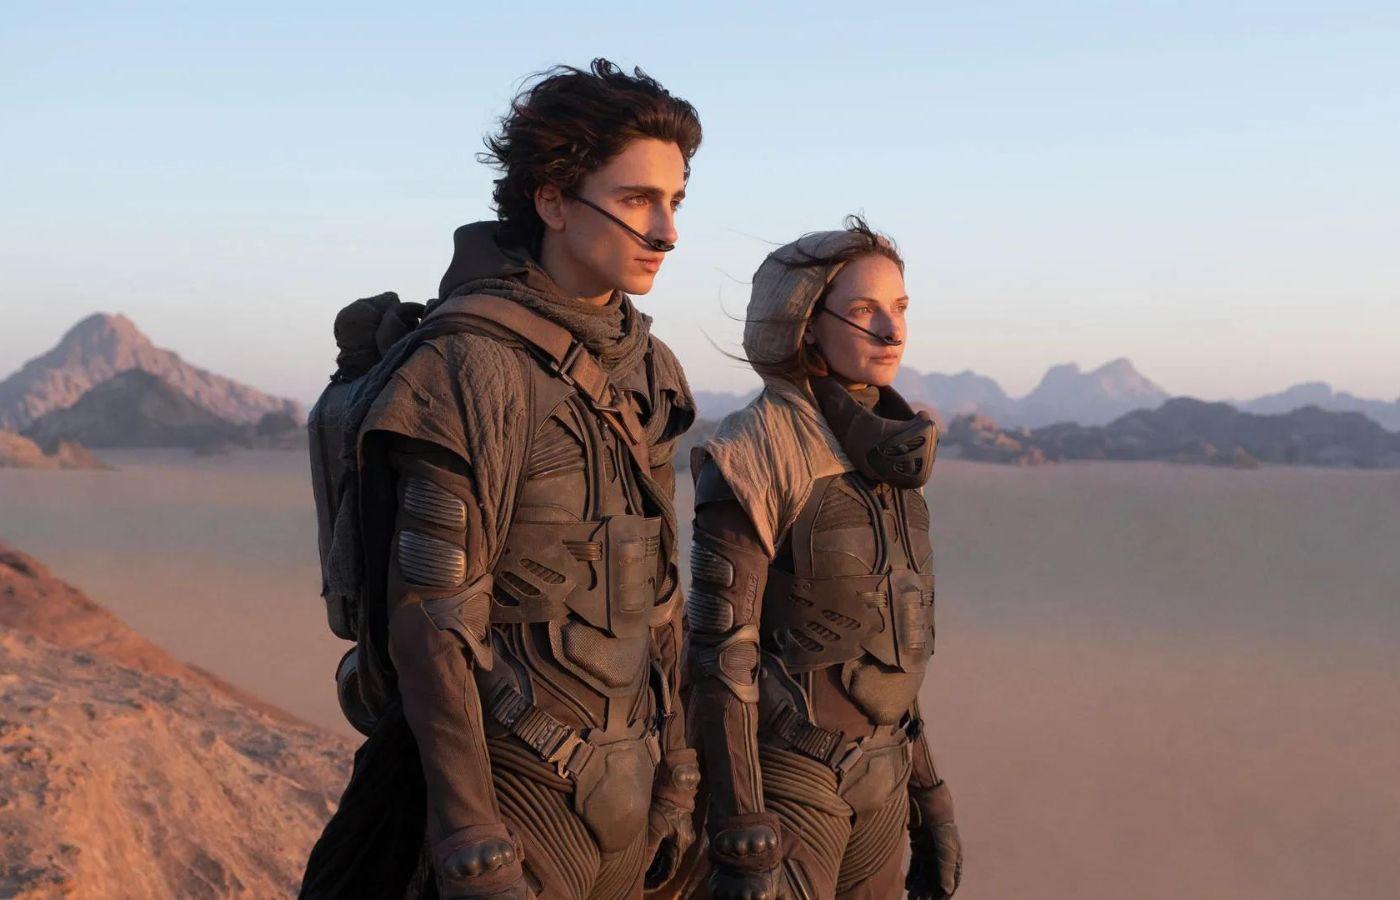 Timothee Chalamet and Rebecca Ferguson in Dune Part Two